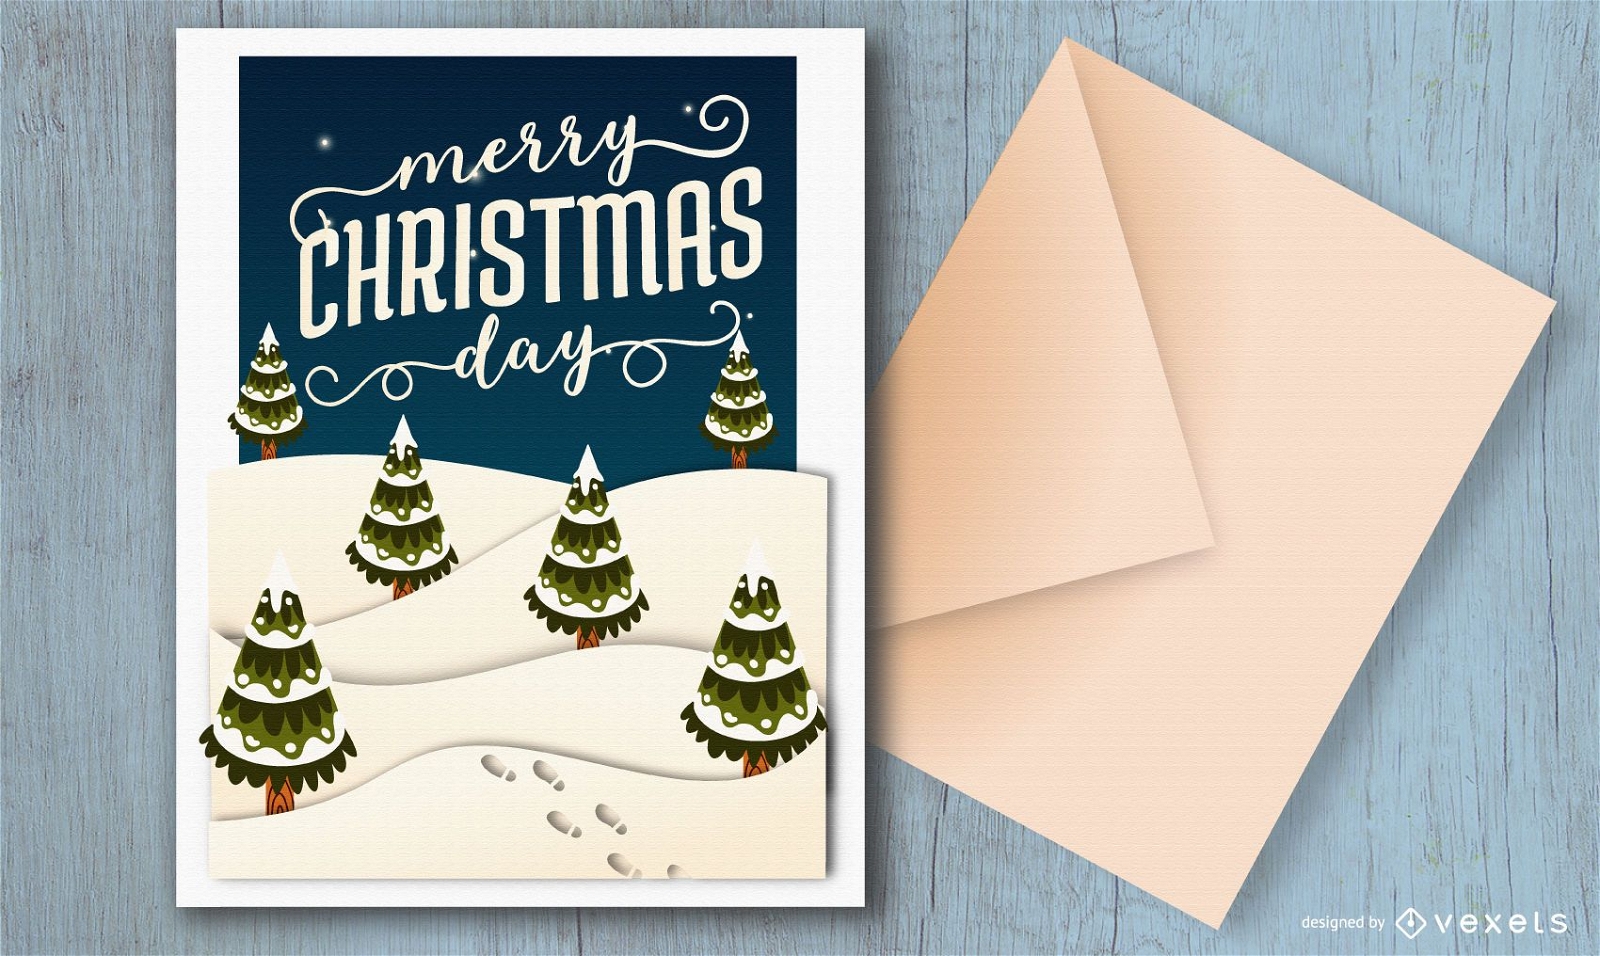 Merry christmas day card design